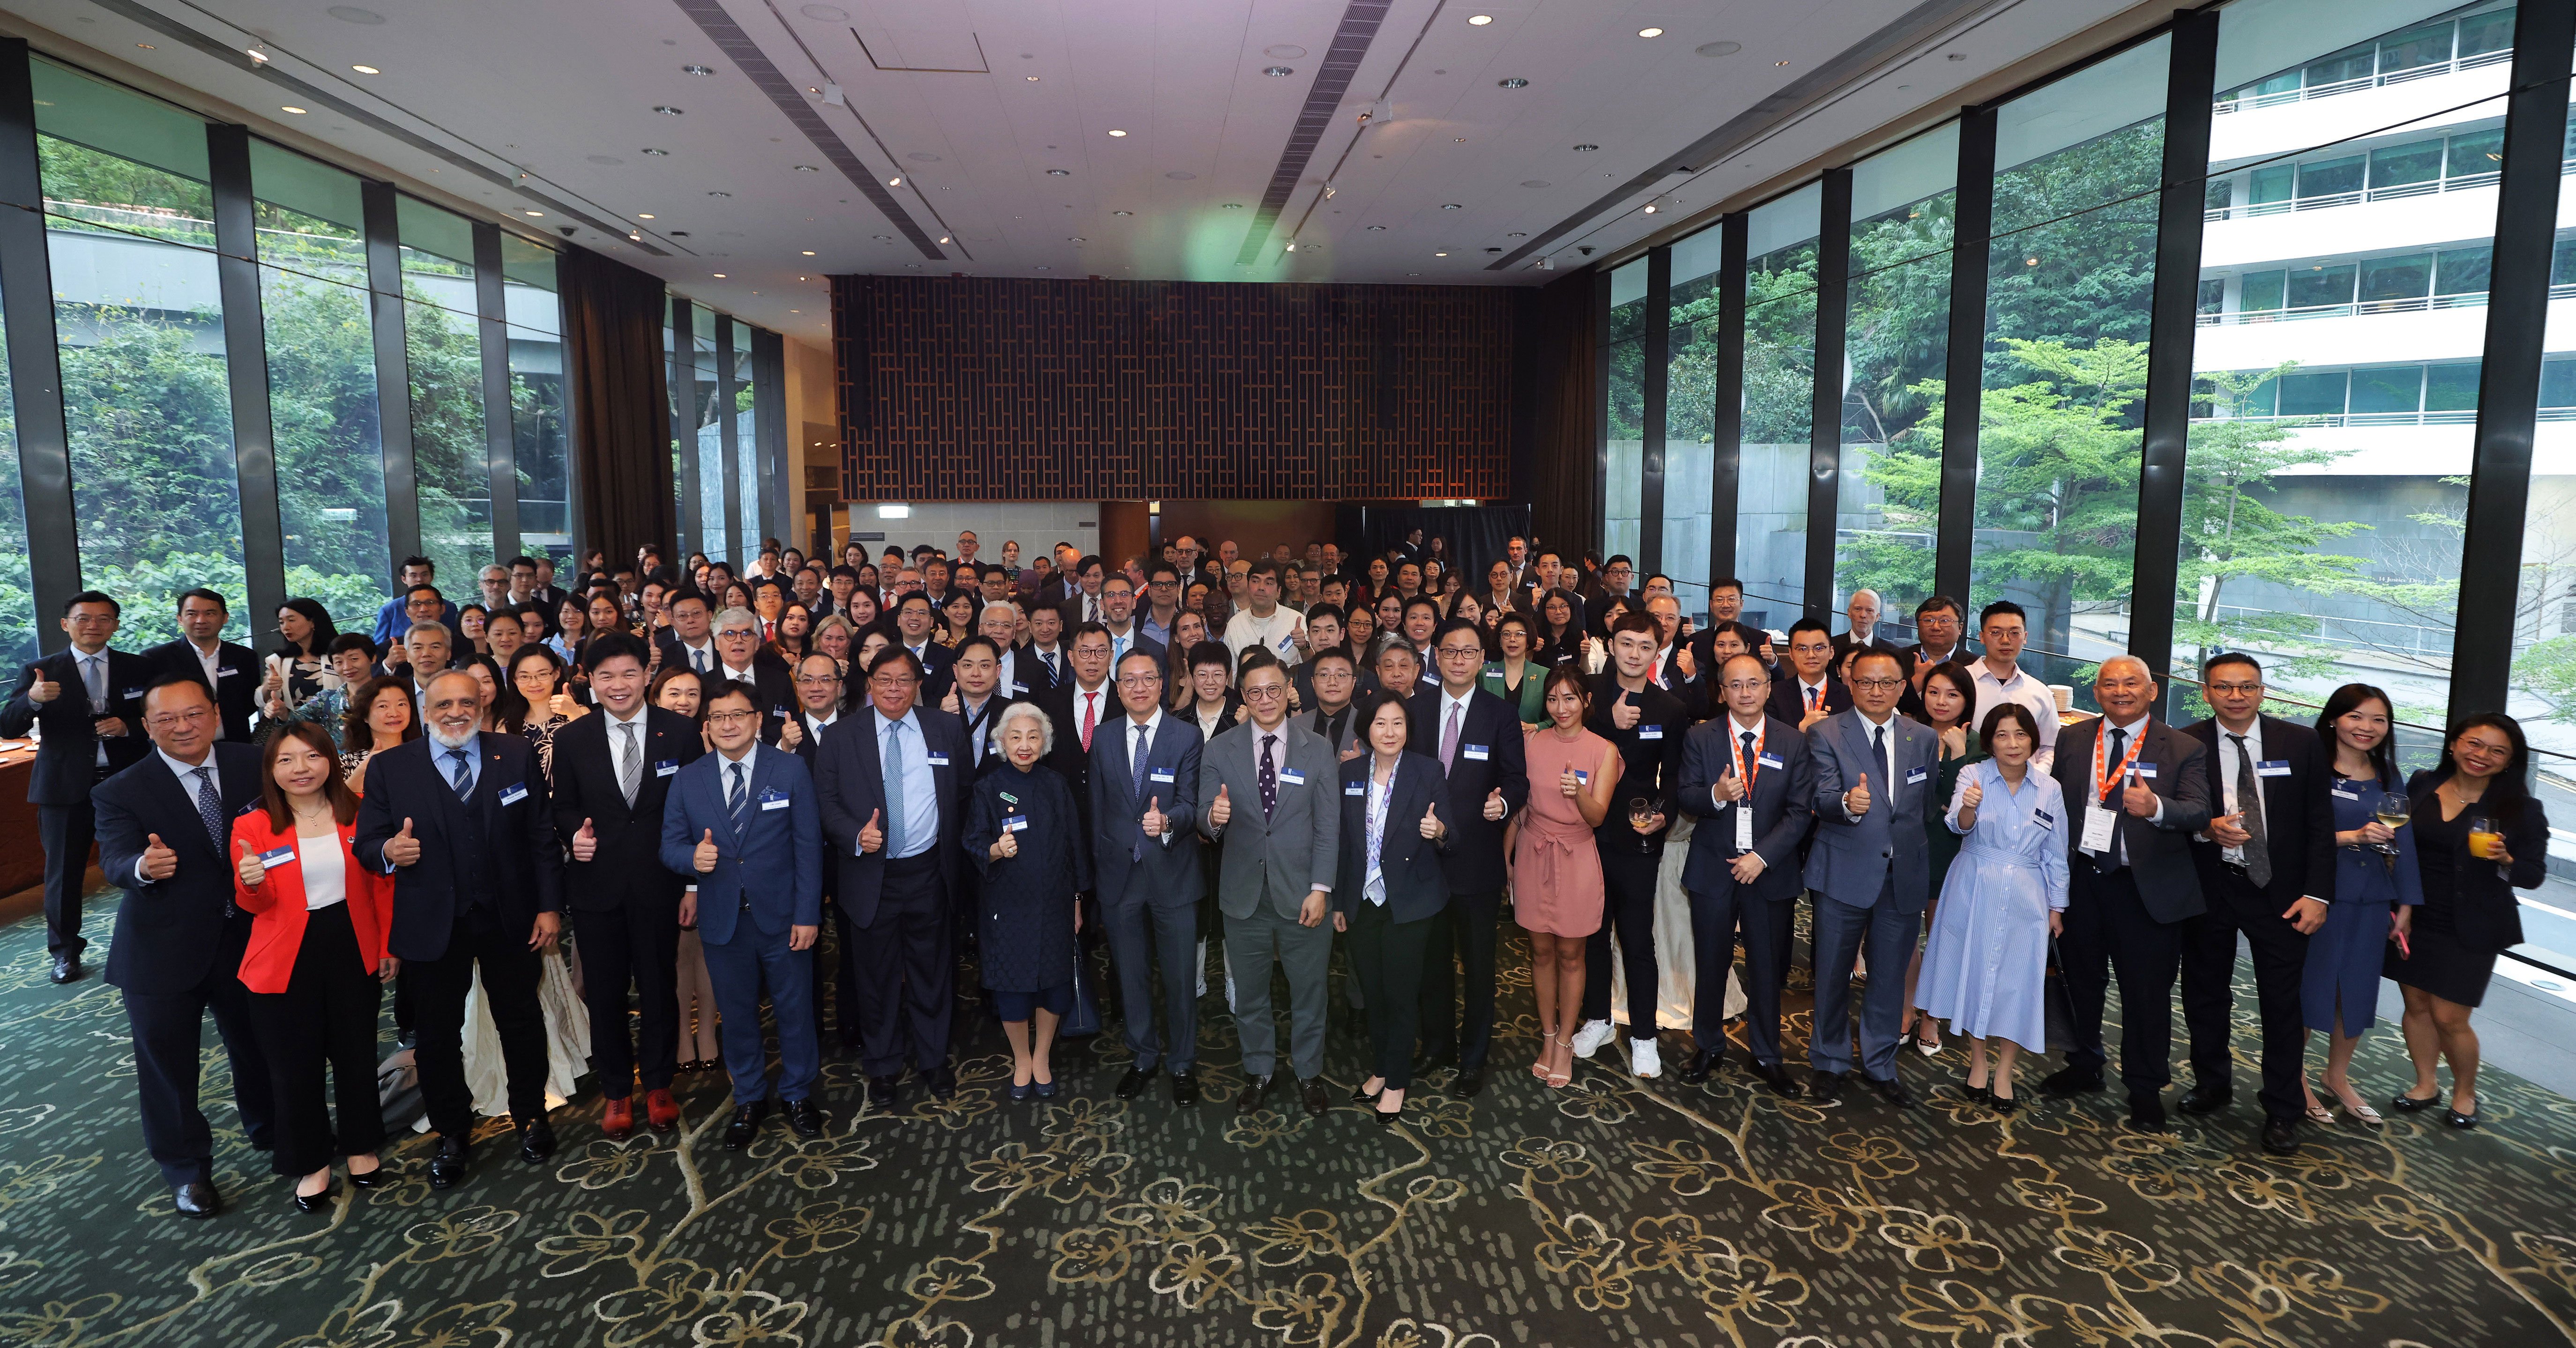 The 26th ICCA Congress in Hong Kong, supported by the Department of Justice and hosted by the Hong Kong International Arbitration Centre, draws over 1,400 participants from 70+ jurisdictions, marking the highest attendance in its history. 